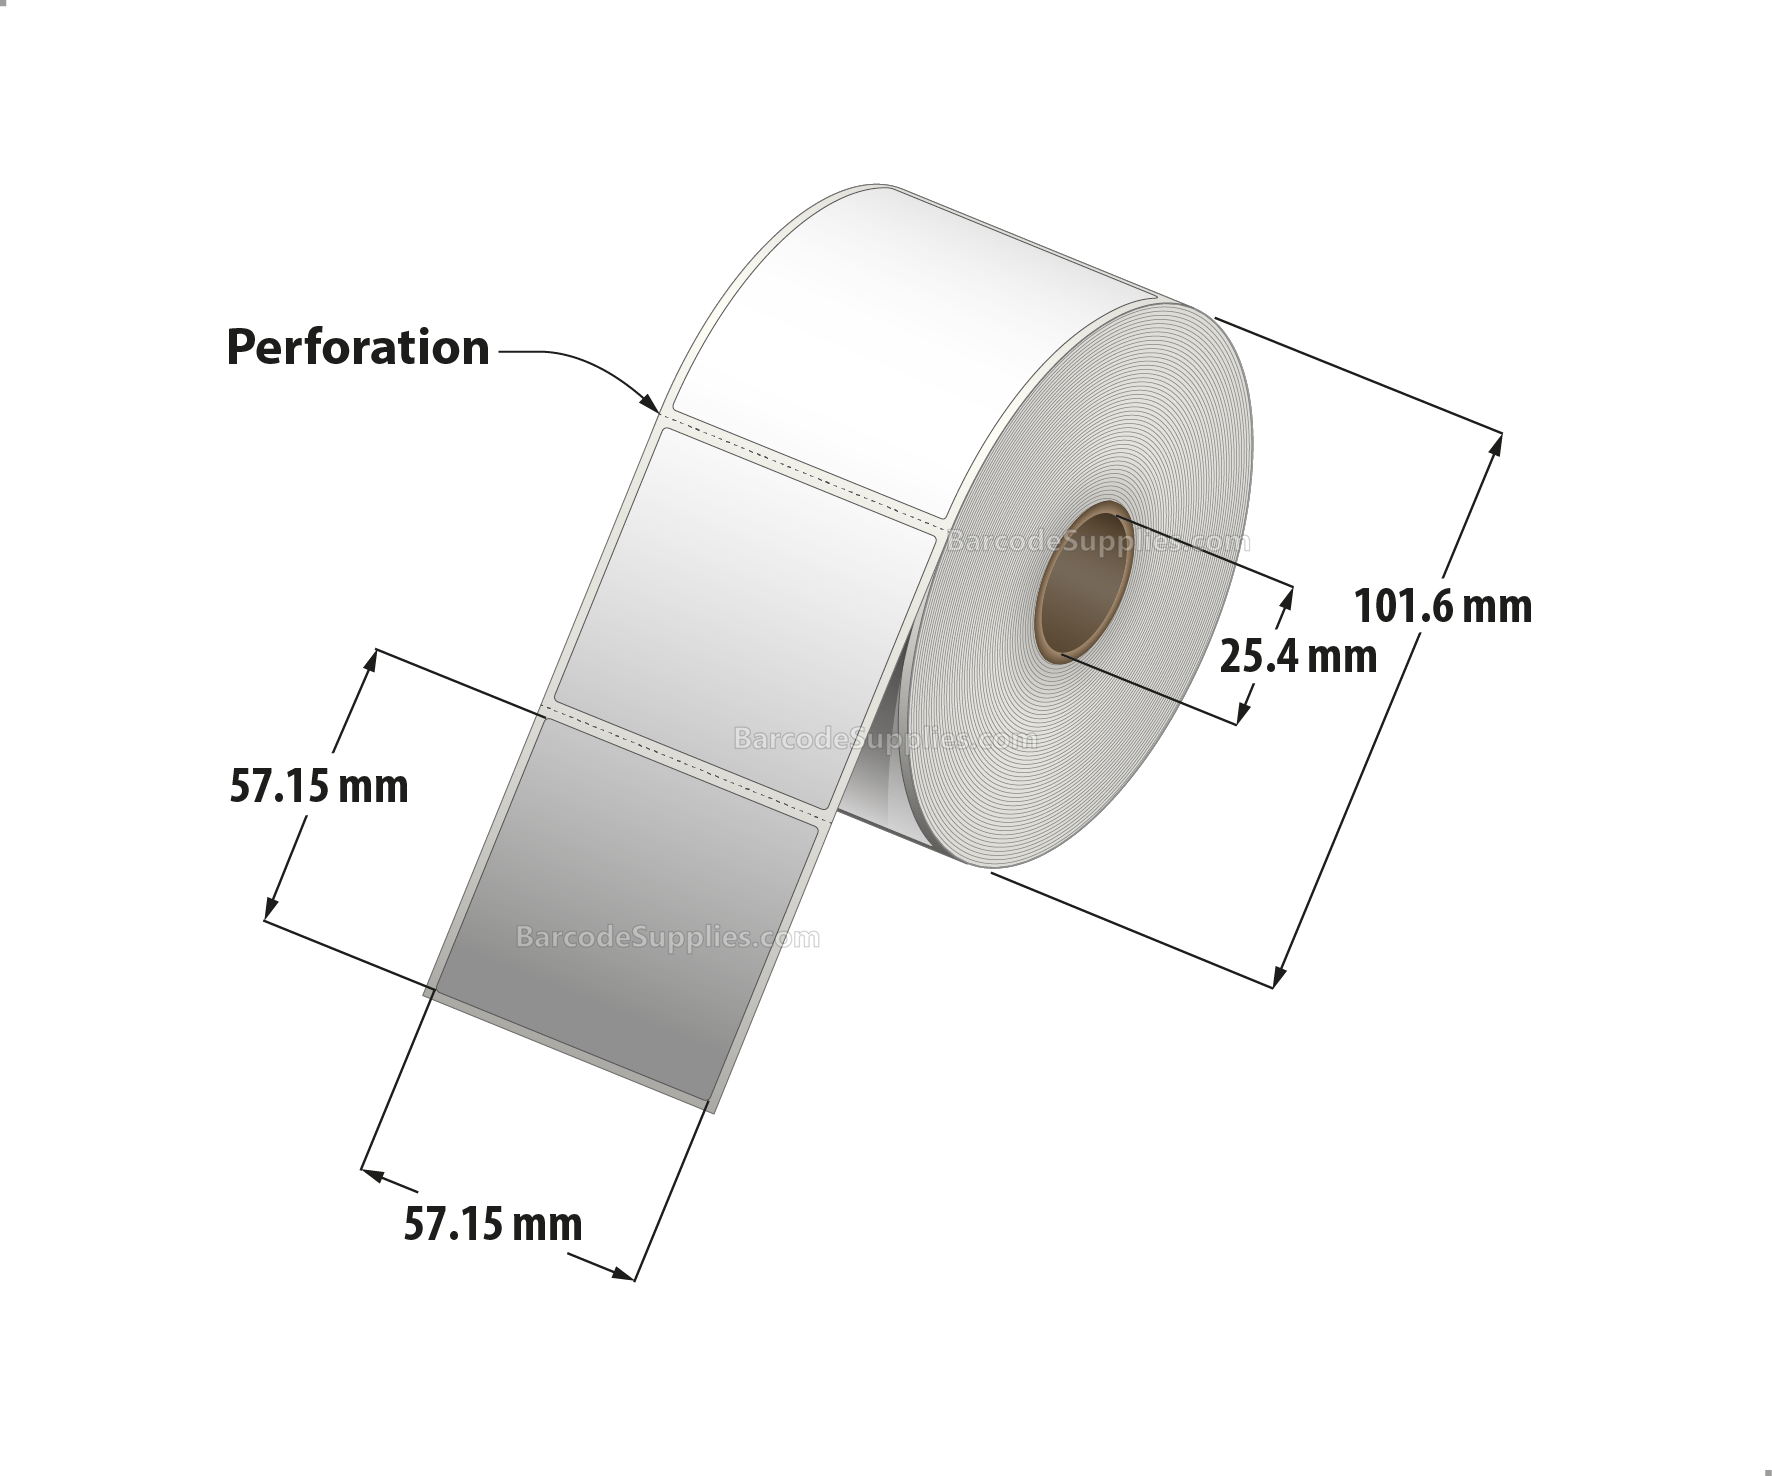 2.25 x 2.25 Thermal Transfer White Labels With Rubber Adhesive - Perforated - 700 Labels Per Roll - Carton Of 12 Rolls - 8400 Labels Total - MPN: RTT4-225225-1P